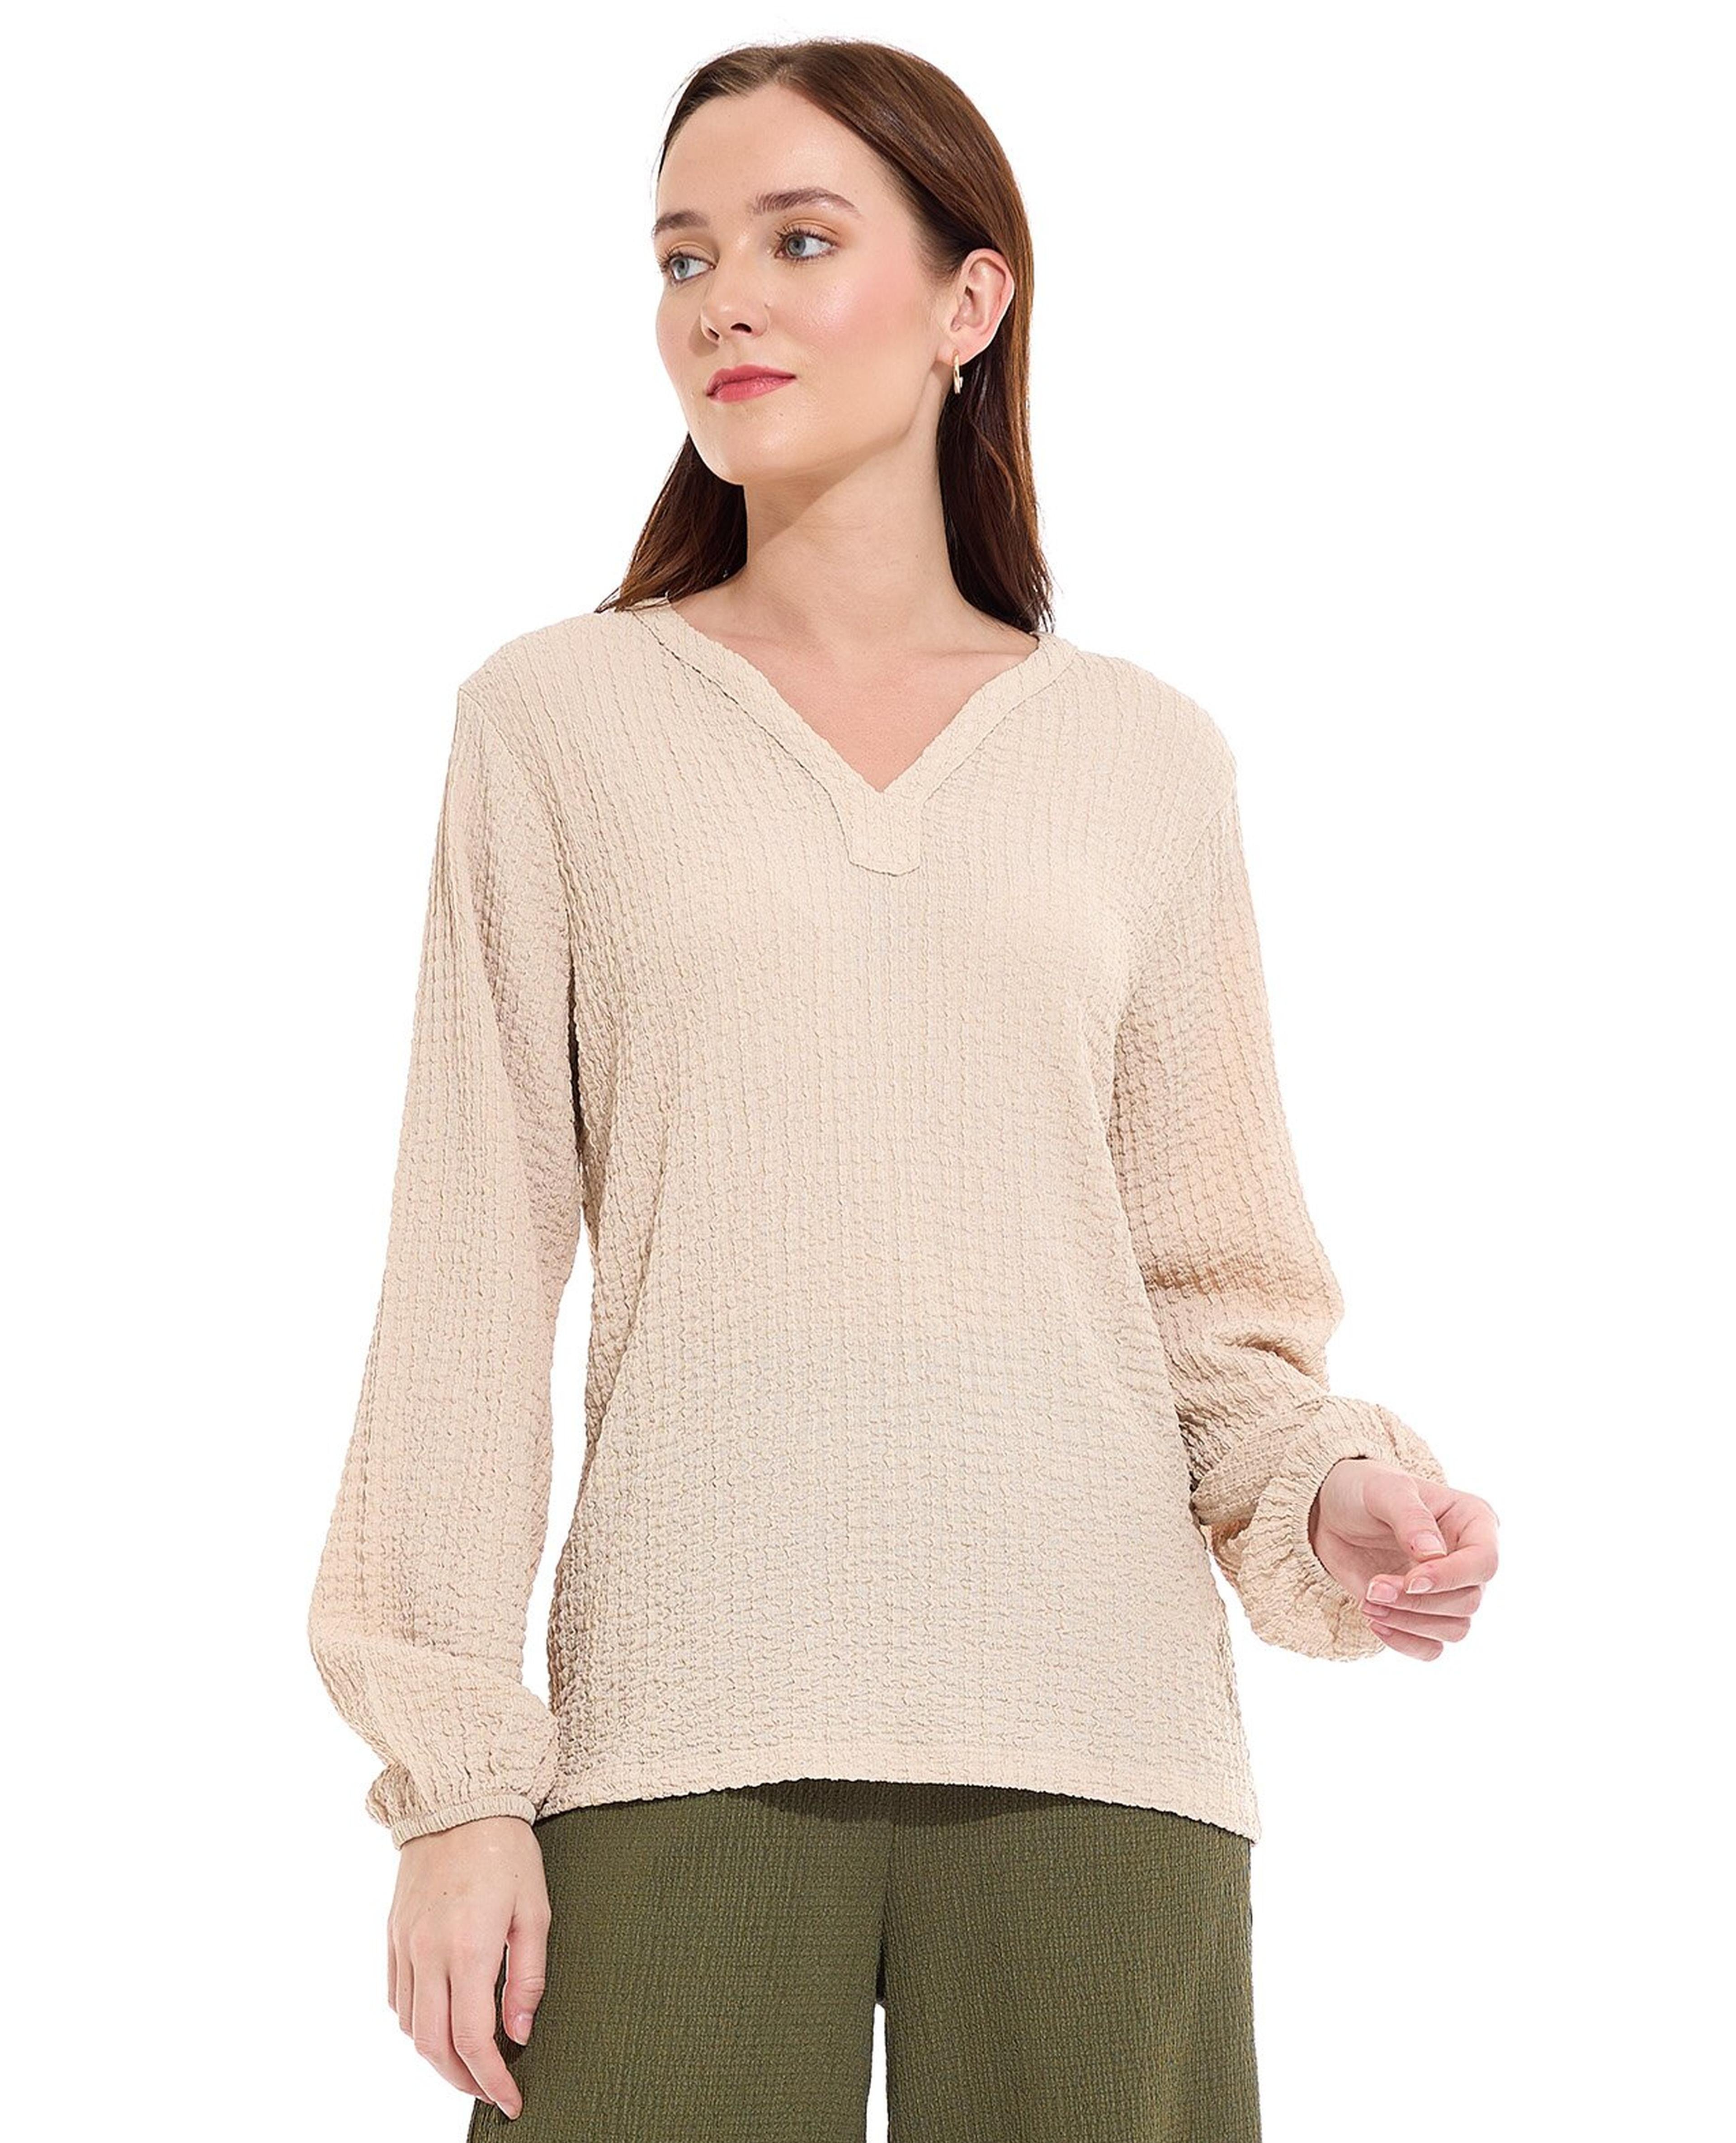 Textured Top with V-Neck and Long Sleeves